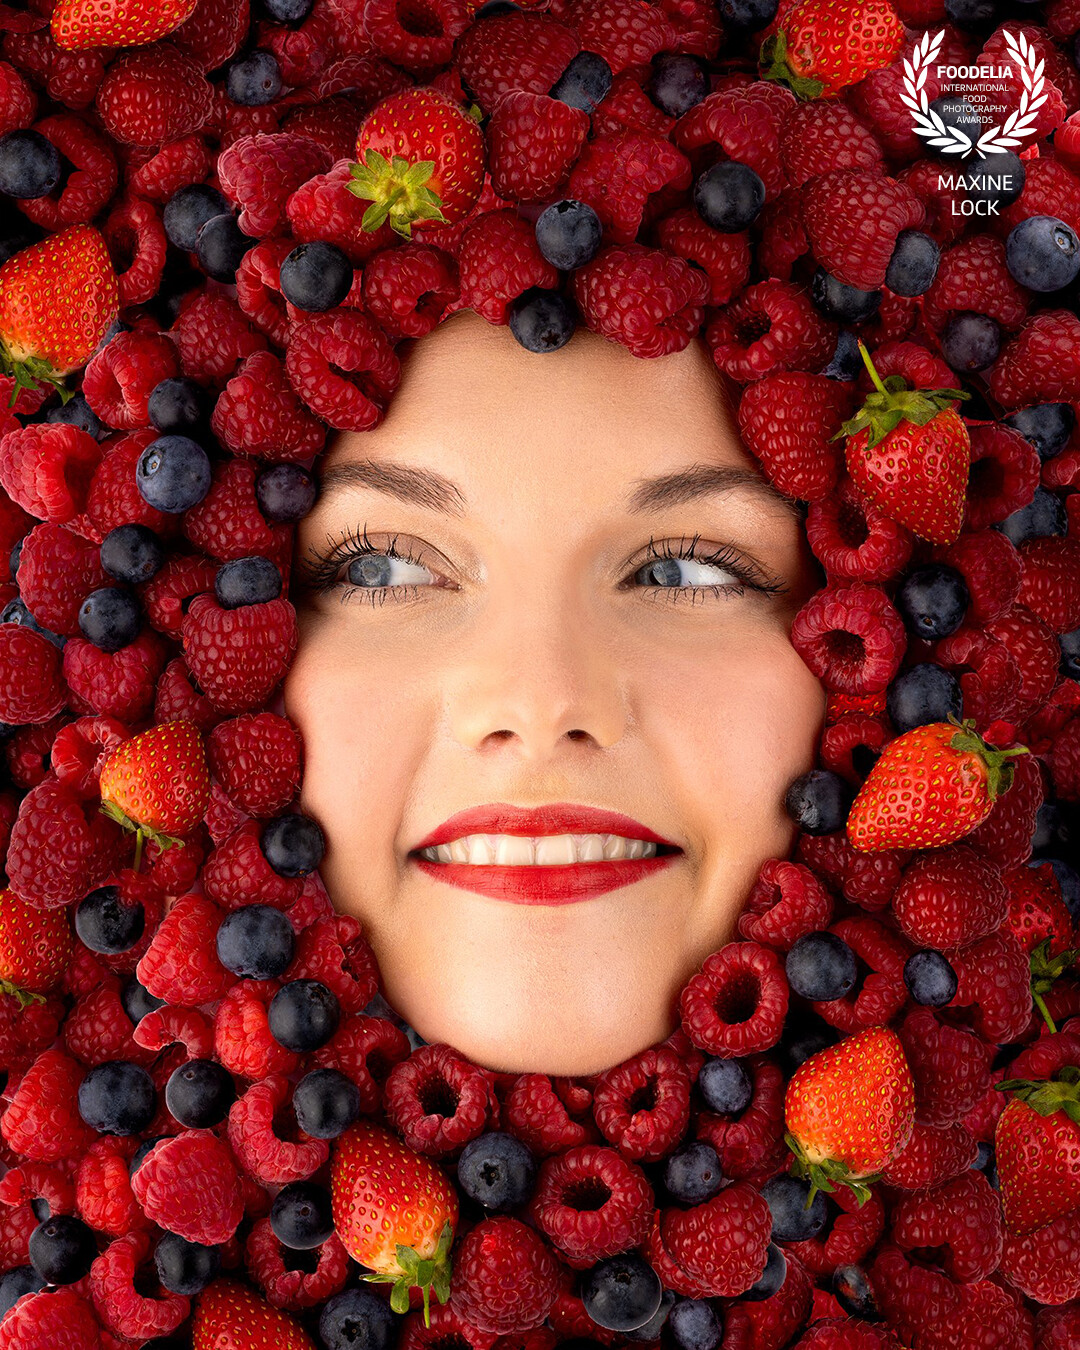 A face embodied within a sea of berries.